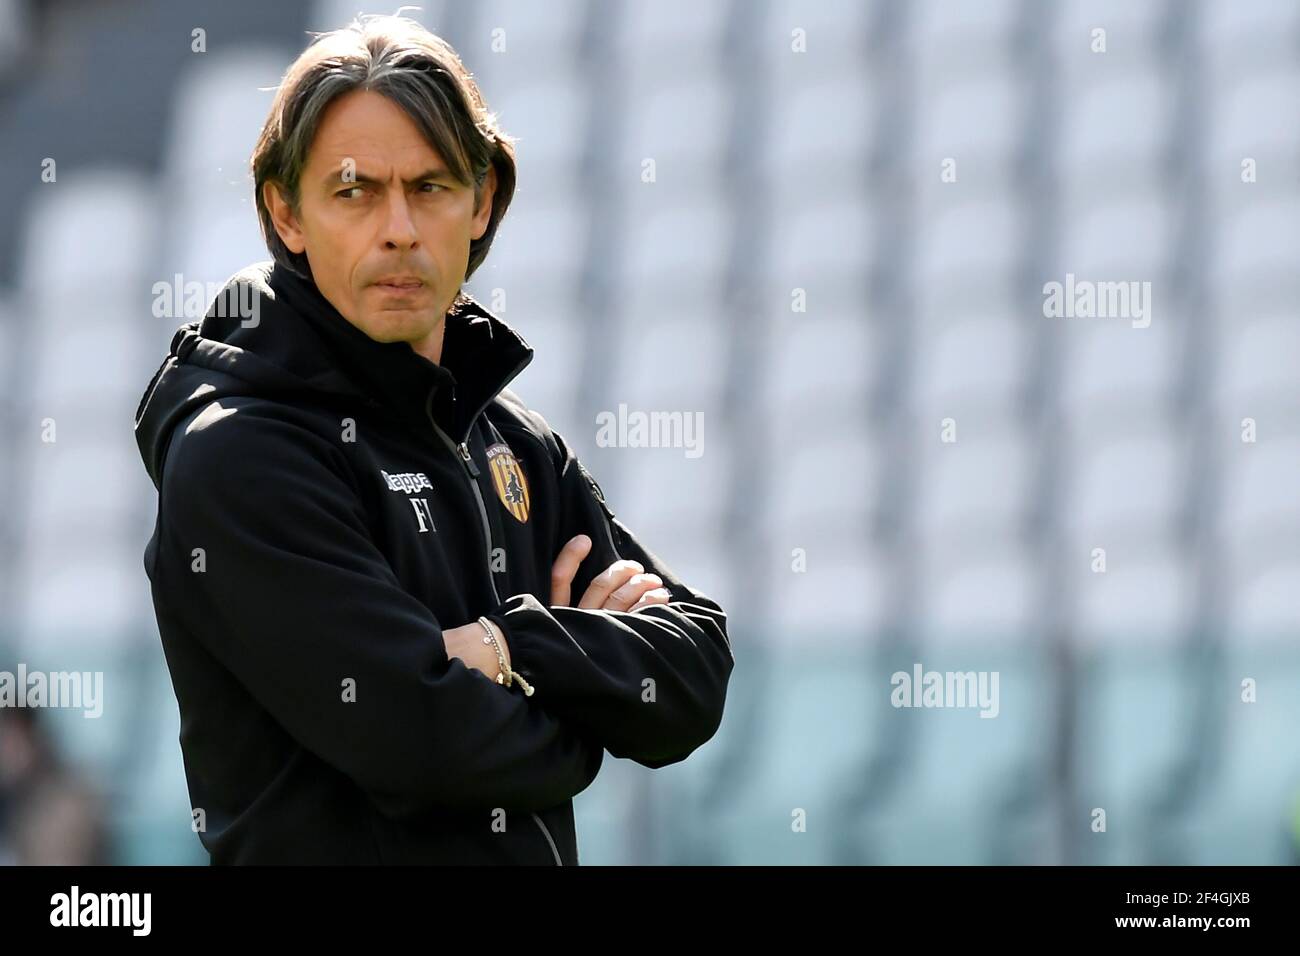 Turin, Italy. 21st Mar, 2021. Filippo Inzaghi coach of Benevento Calcio looks on prior to the Serie A football match between Juventus FC and Benevento Calcio at Allianz stadium in Torino (Italy), March 21th, 2021. Photo Giuliano Marchisciano/OnePlusNine/Insidefoto Credit: insidefoto srl/Alamy Live News Stock Photo